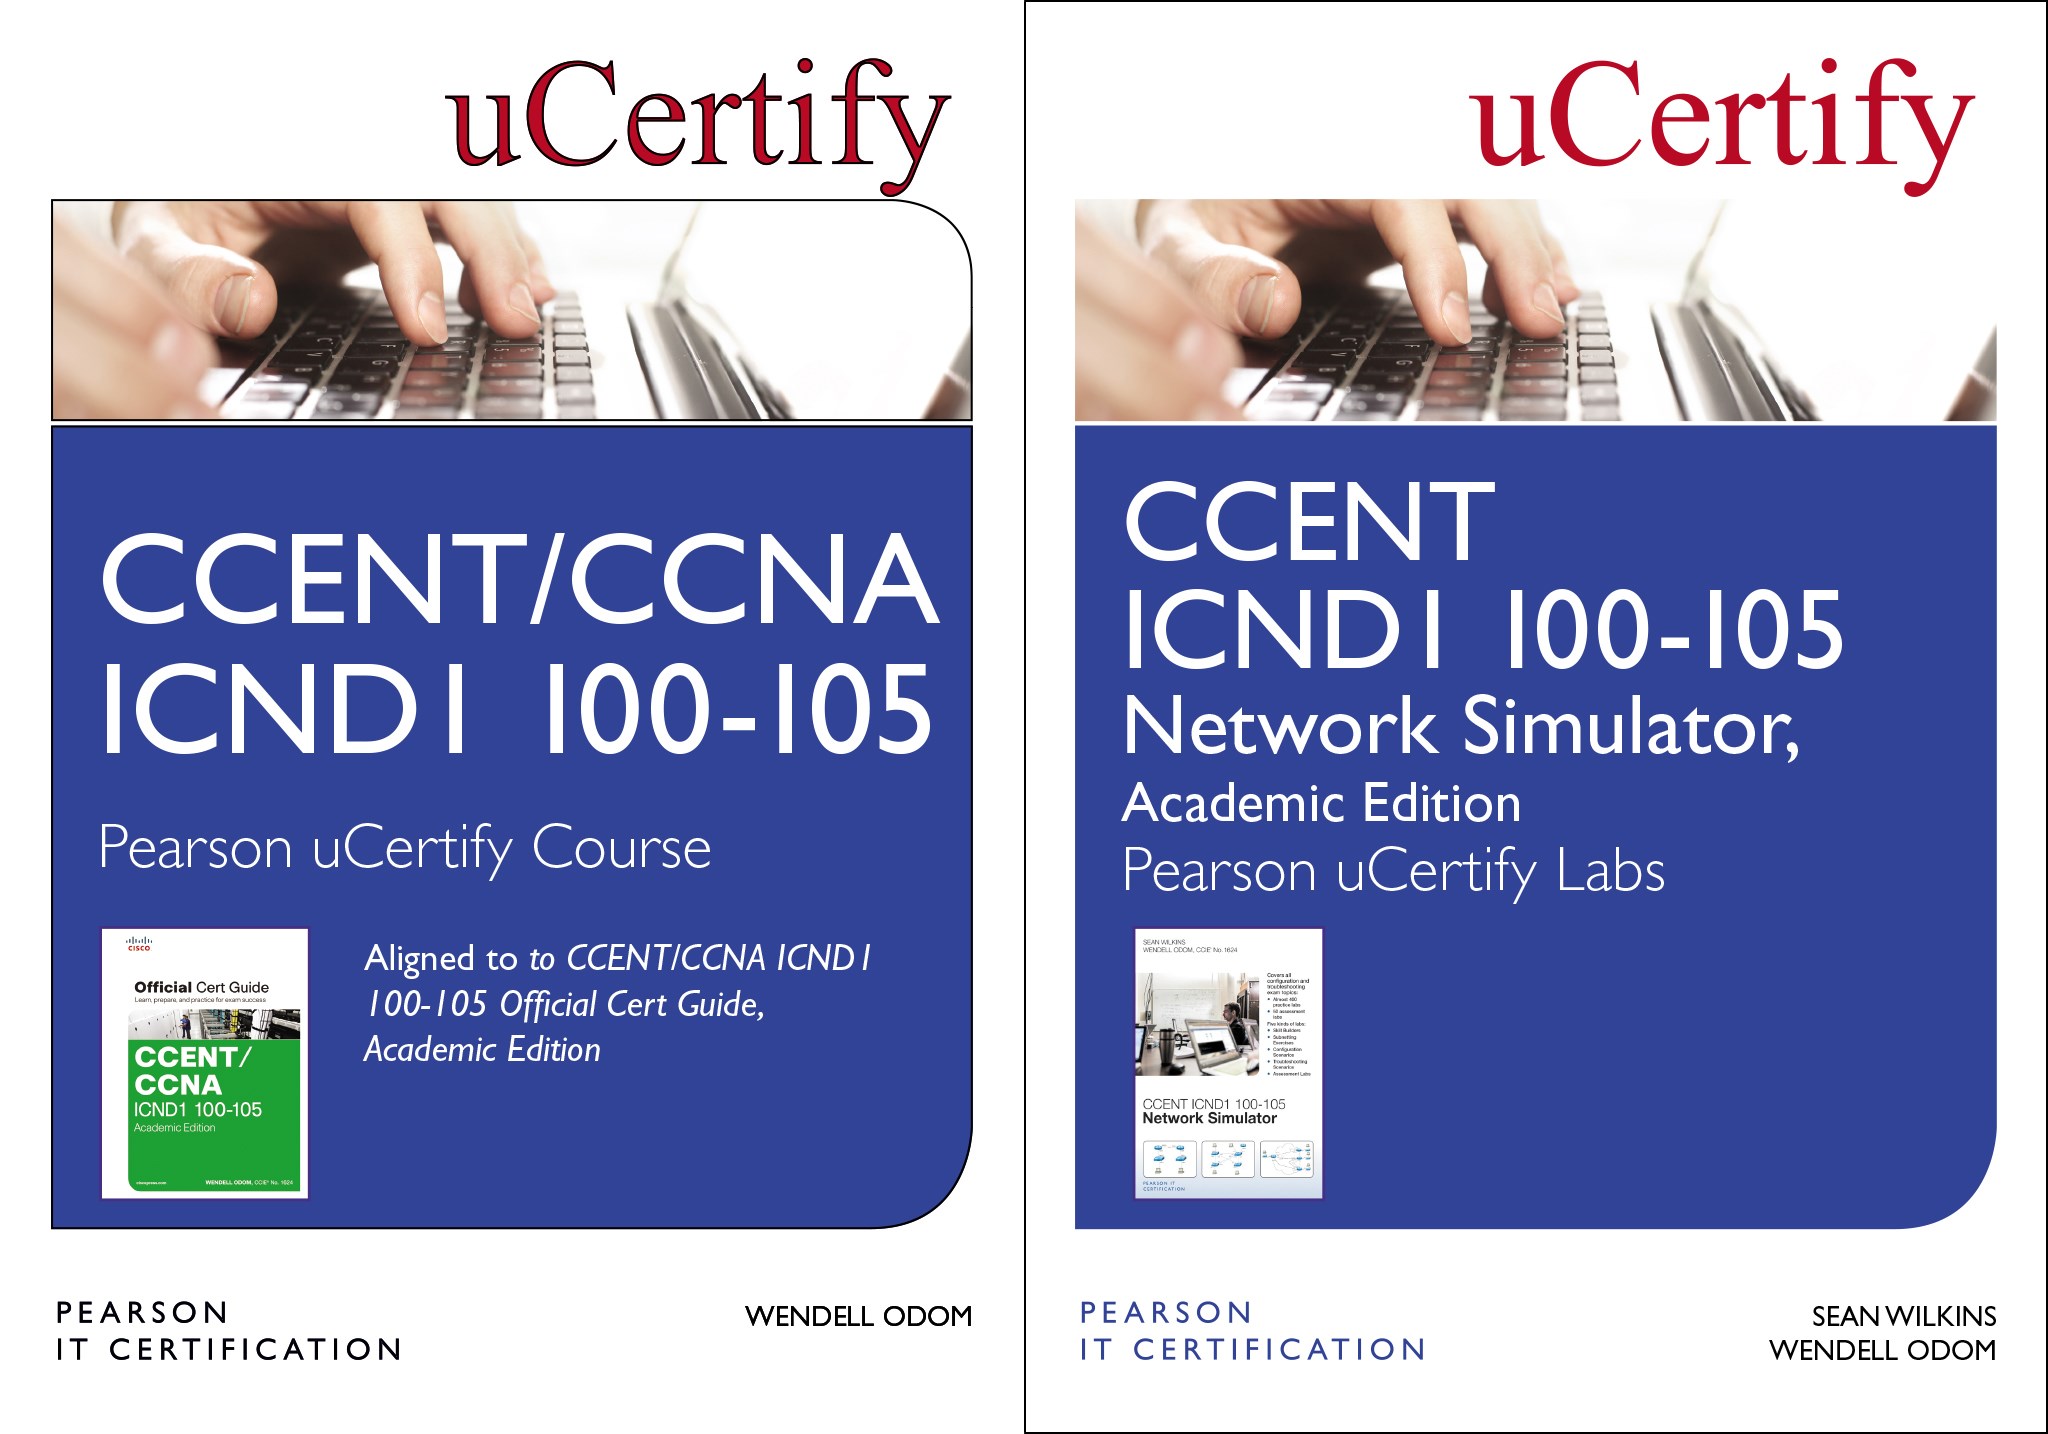 CCENT ICND1 100-105 Pearson uCertify Course and Network Simulator Academic Edition Bundle